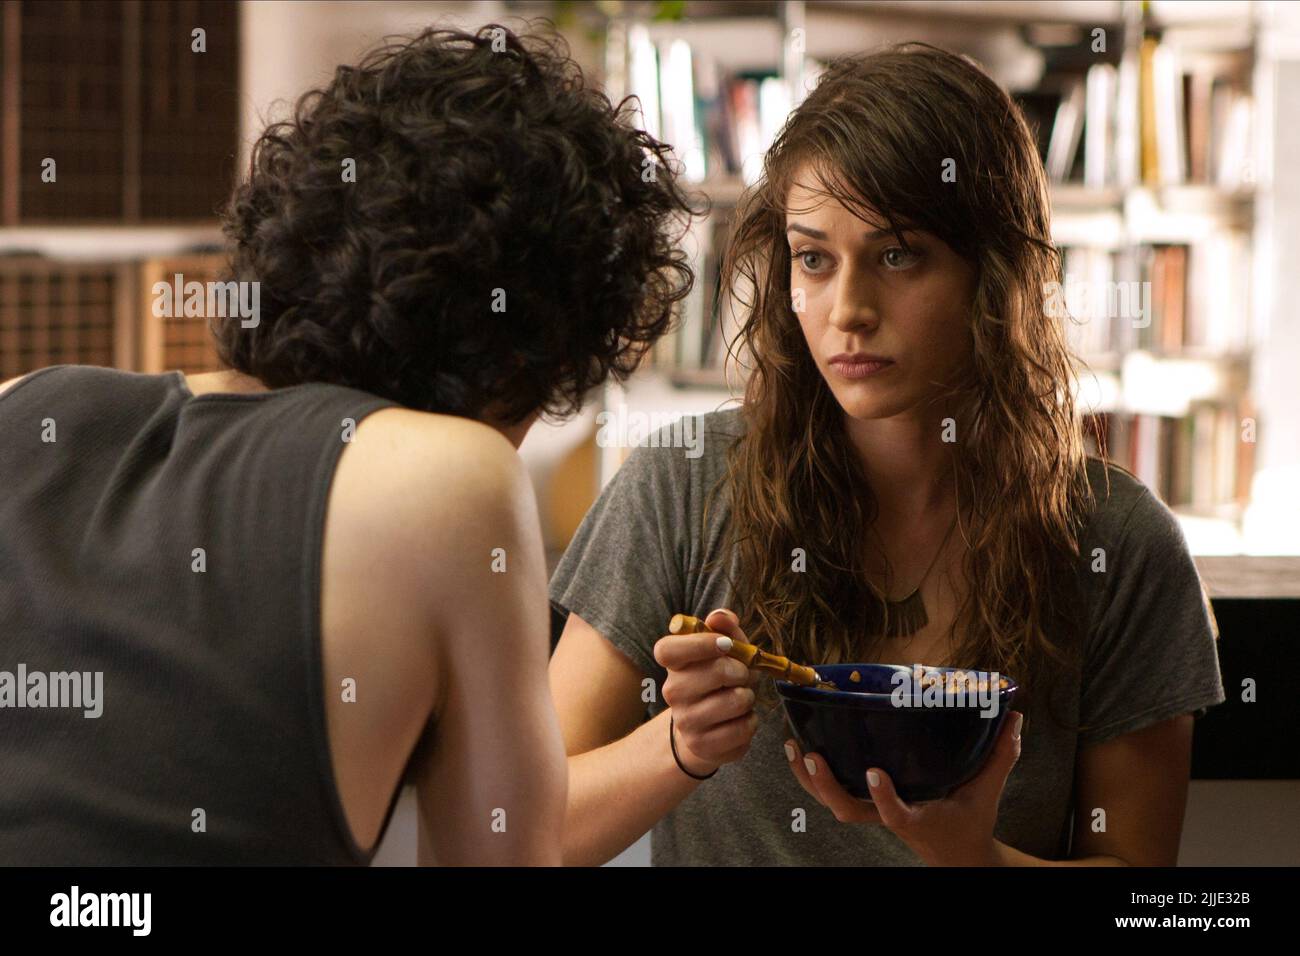 LIZZY CAPLAN, SAVE THE DATE, 2012 Banque D'Images